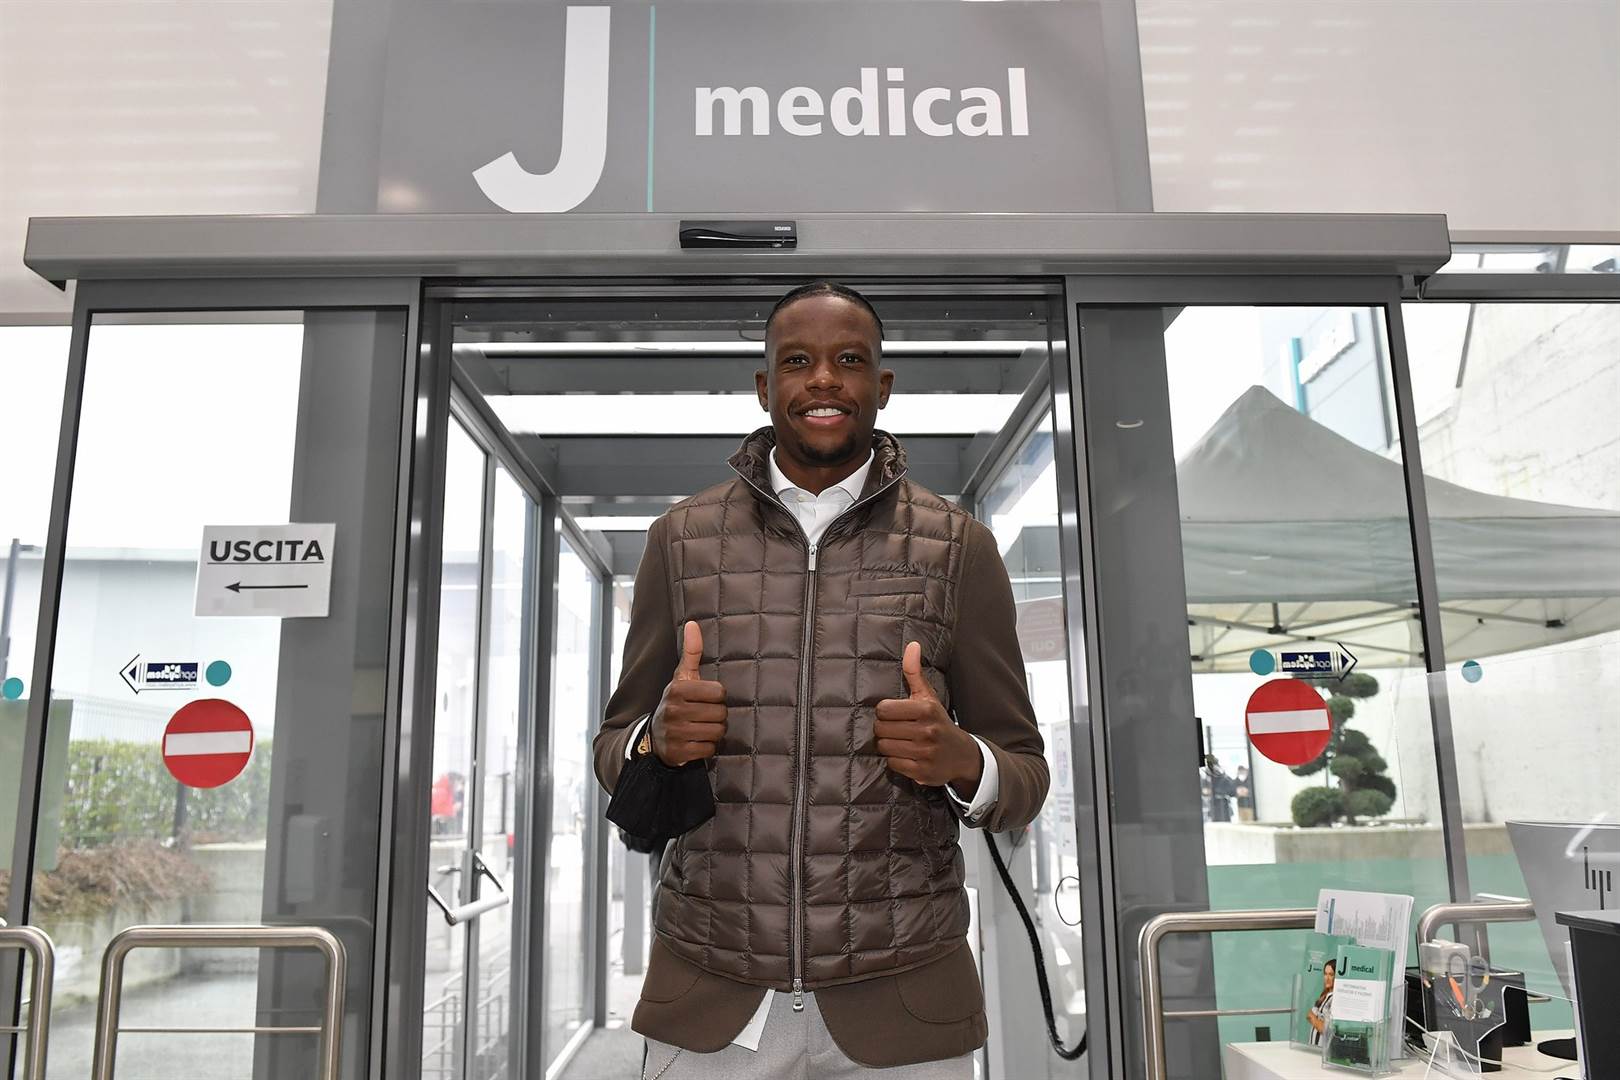 Confirmed deal - Denis Zakaria to Juventus from Bo